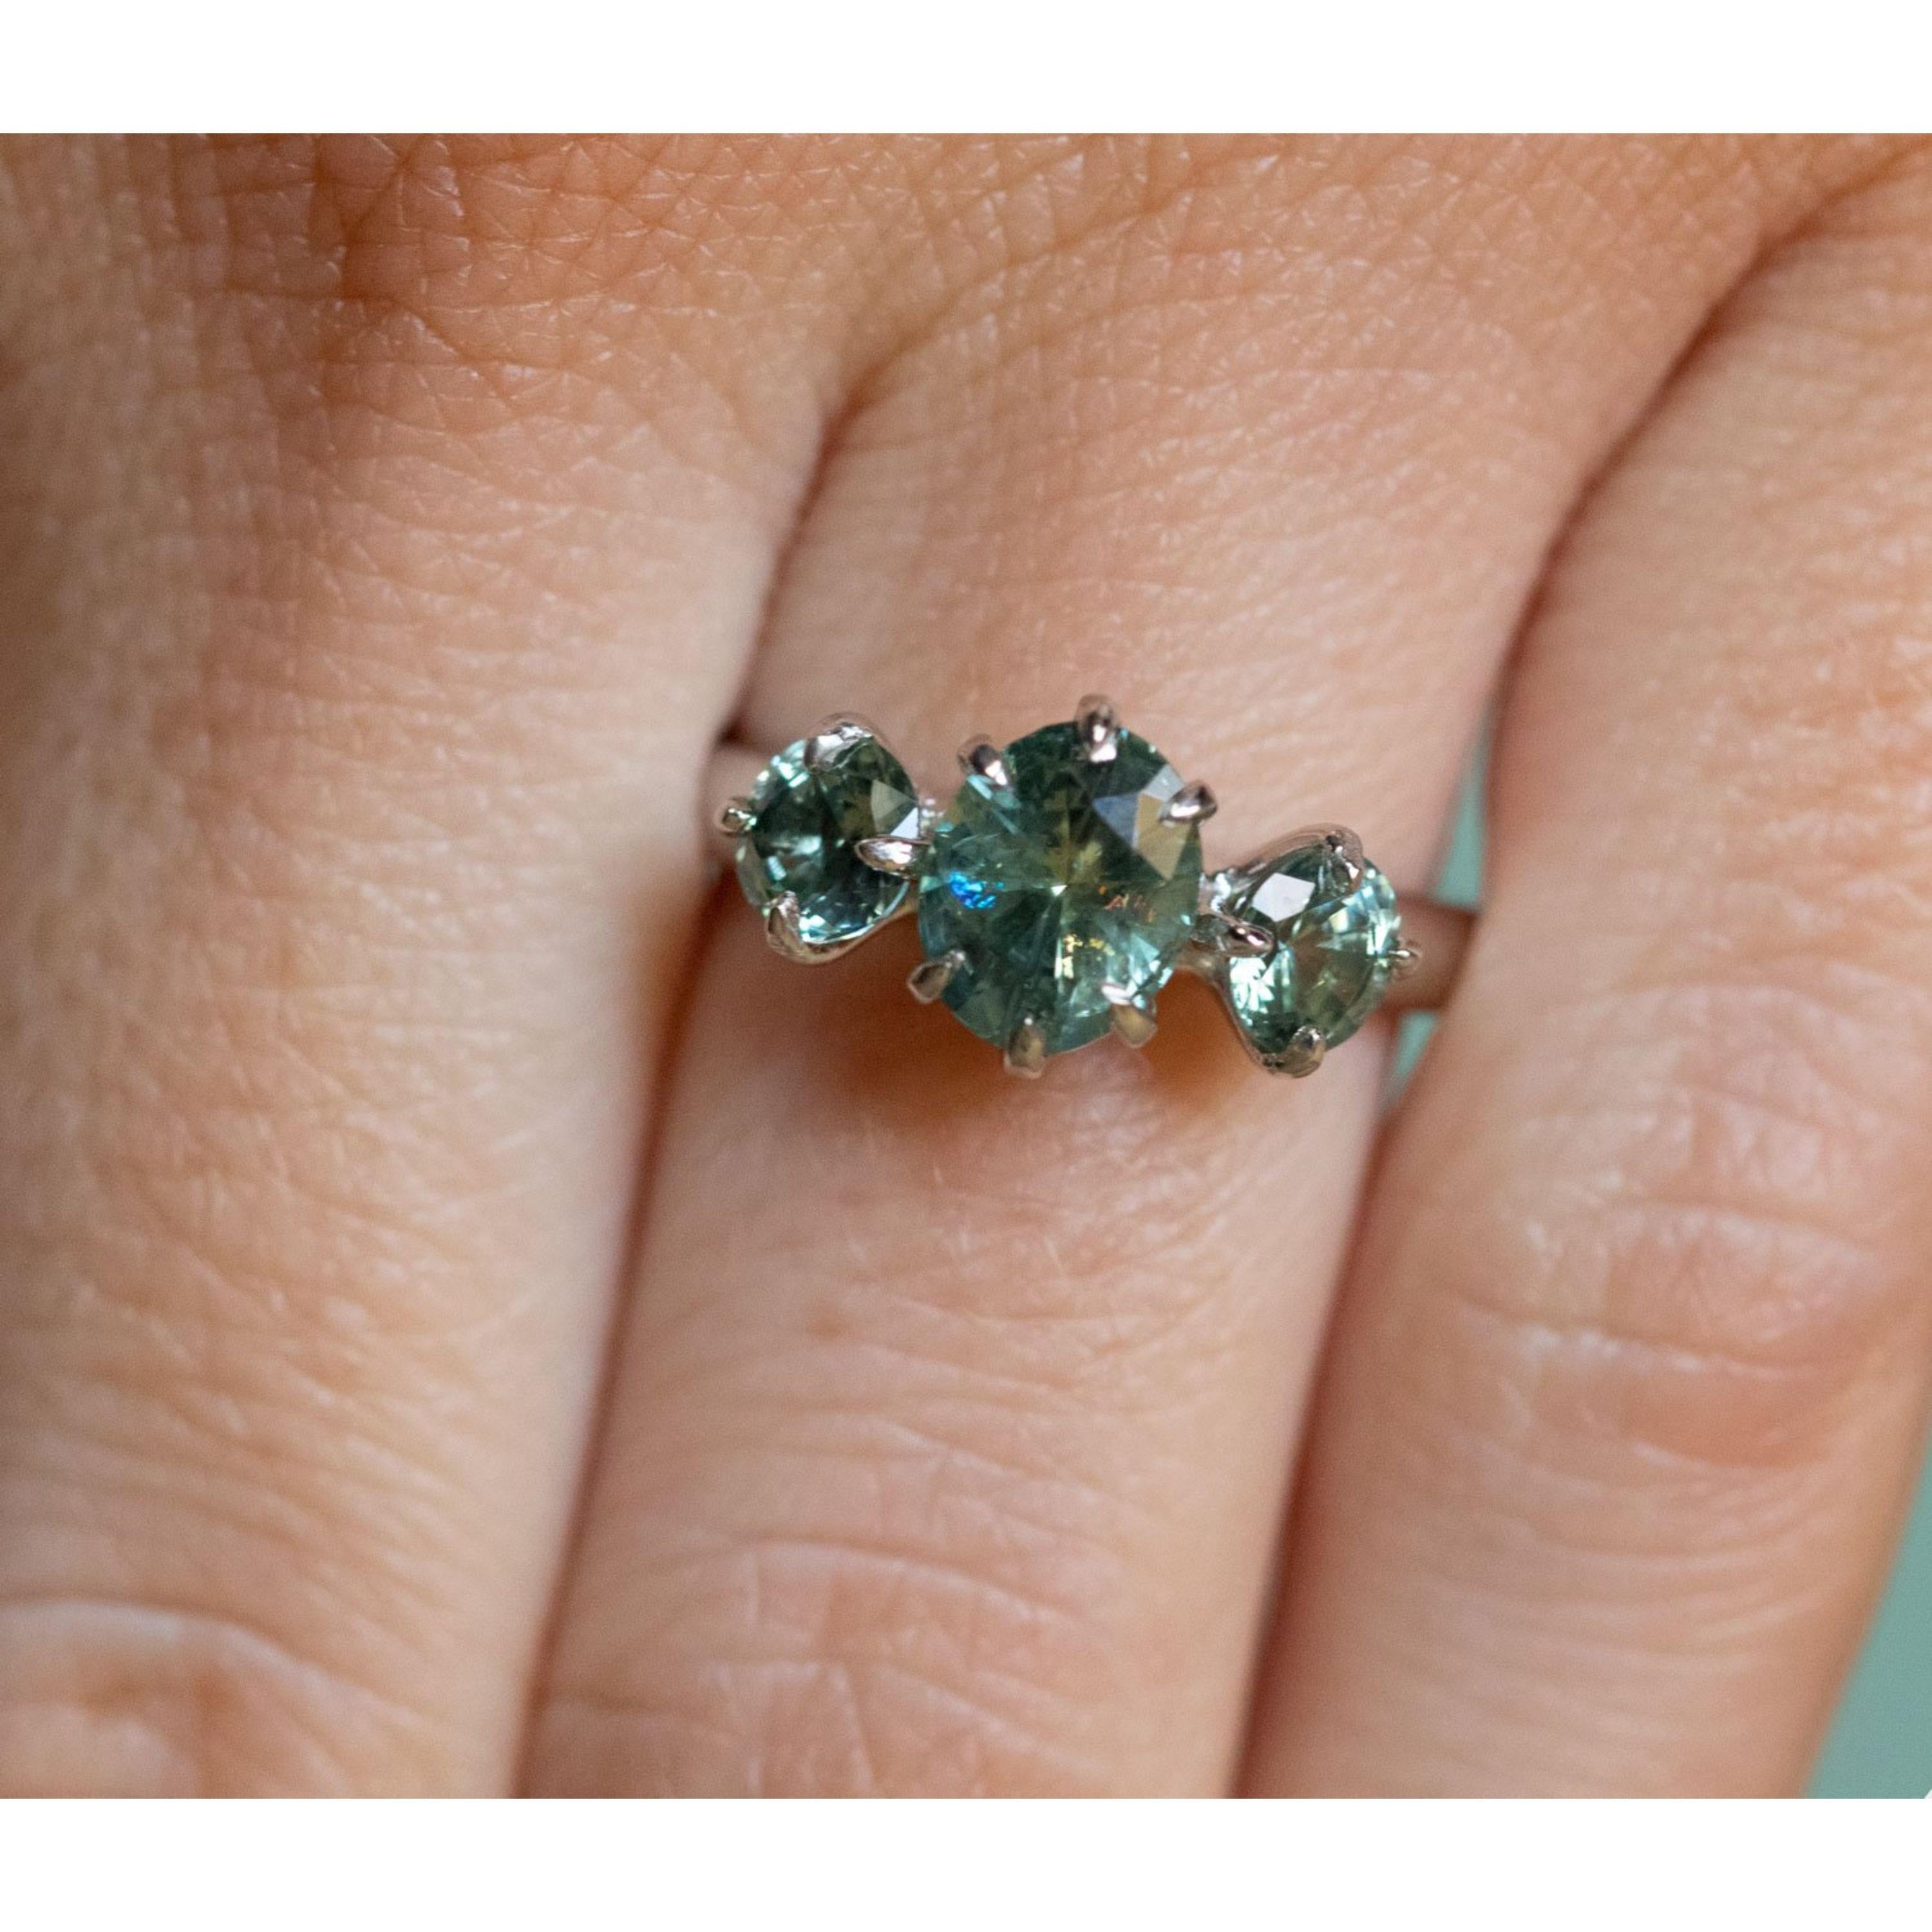 For Sale:  2.5 Carat Oval Cut Natural Green Sapphire Engagement Rings, Three-Stone Ring 2